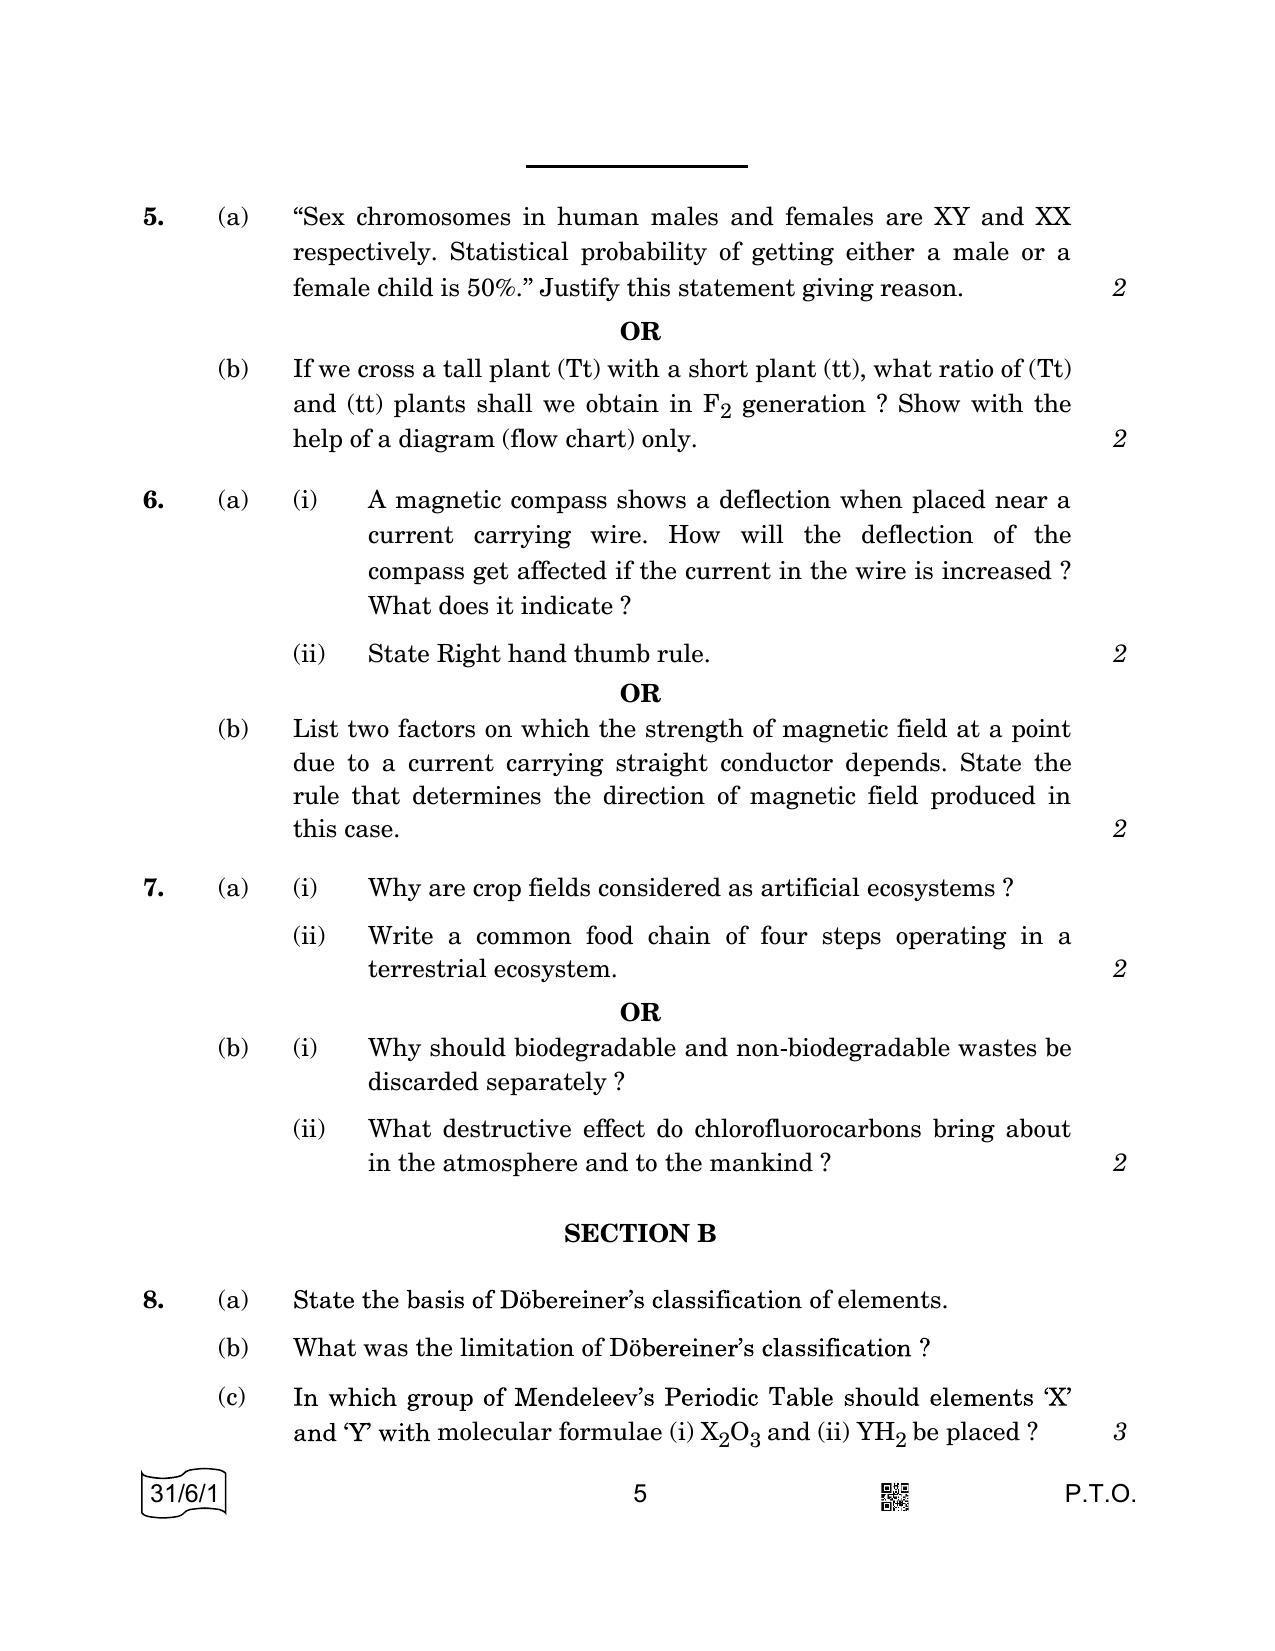 CBSE Class 10 31-6-1 SCIENCE 2022 Compartment Question Paper - Page 5